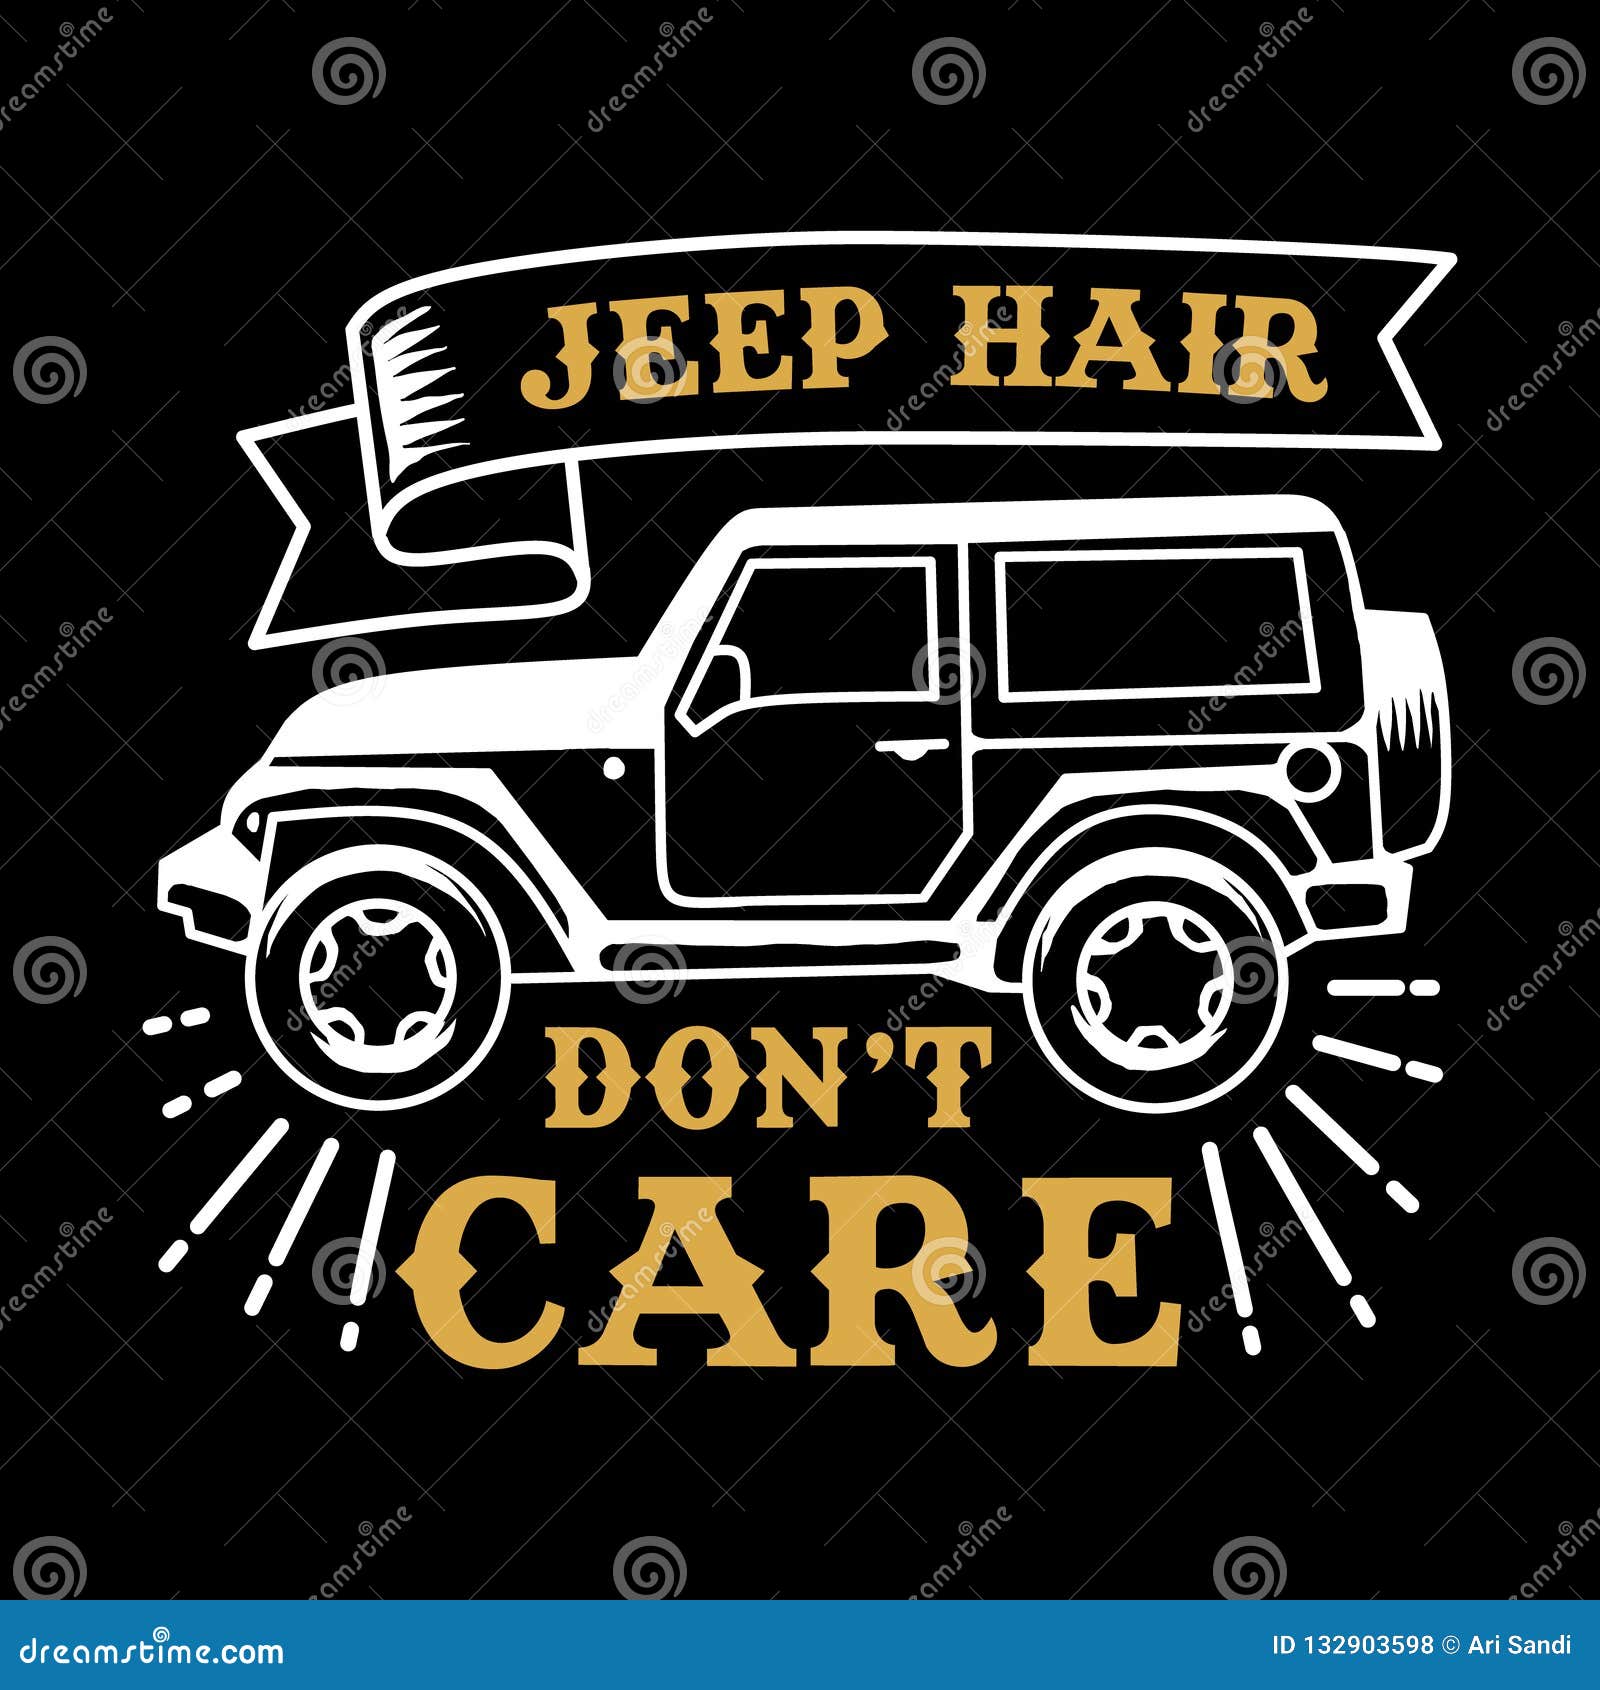 Adventure Car Saying and Quote Stock Vector - Illustration of road,  graphic: 132903598